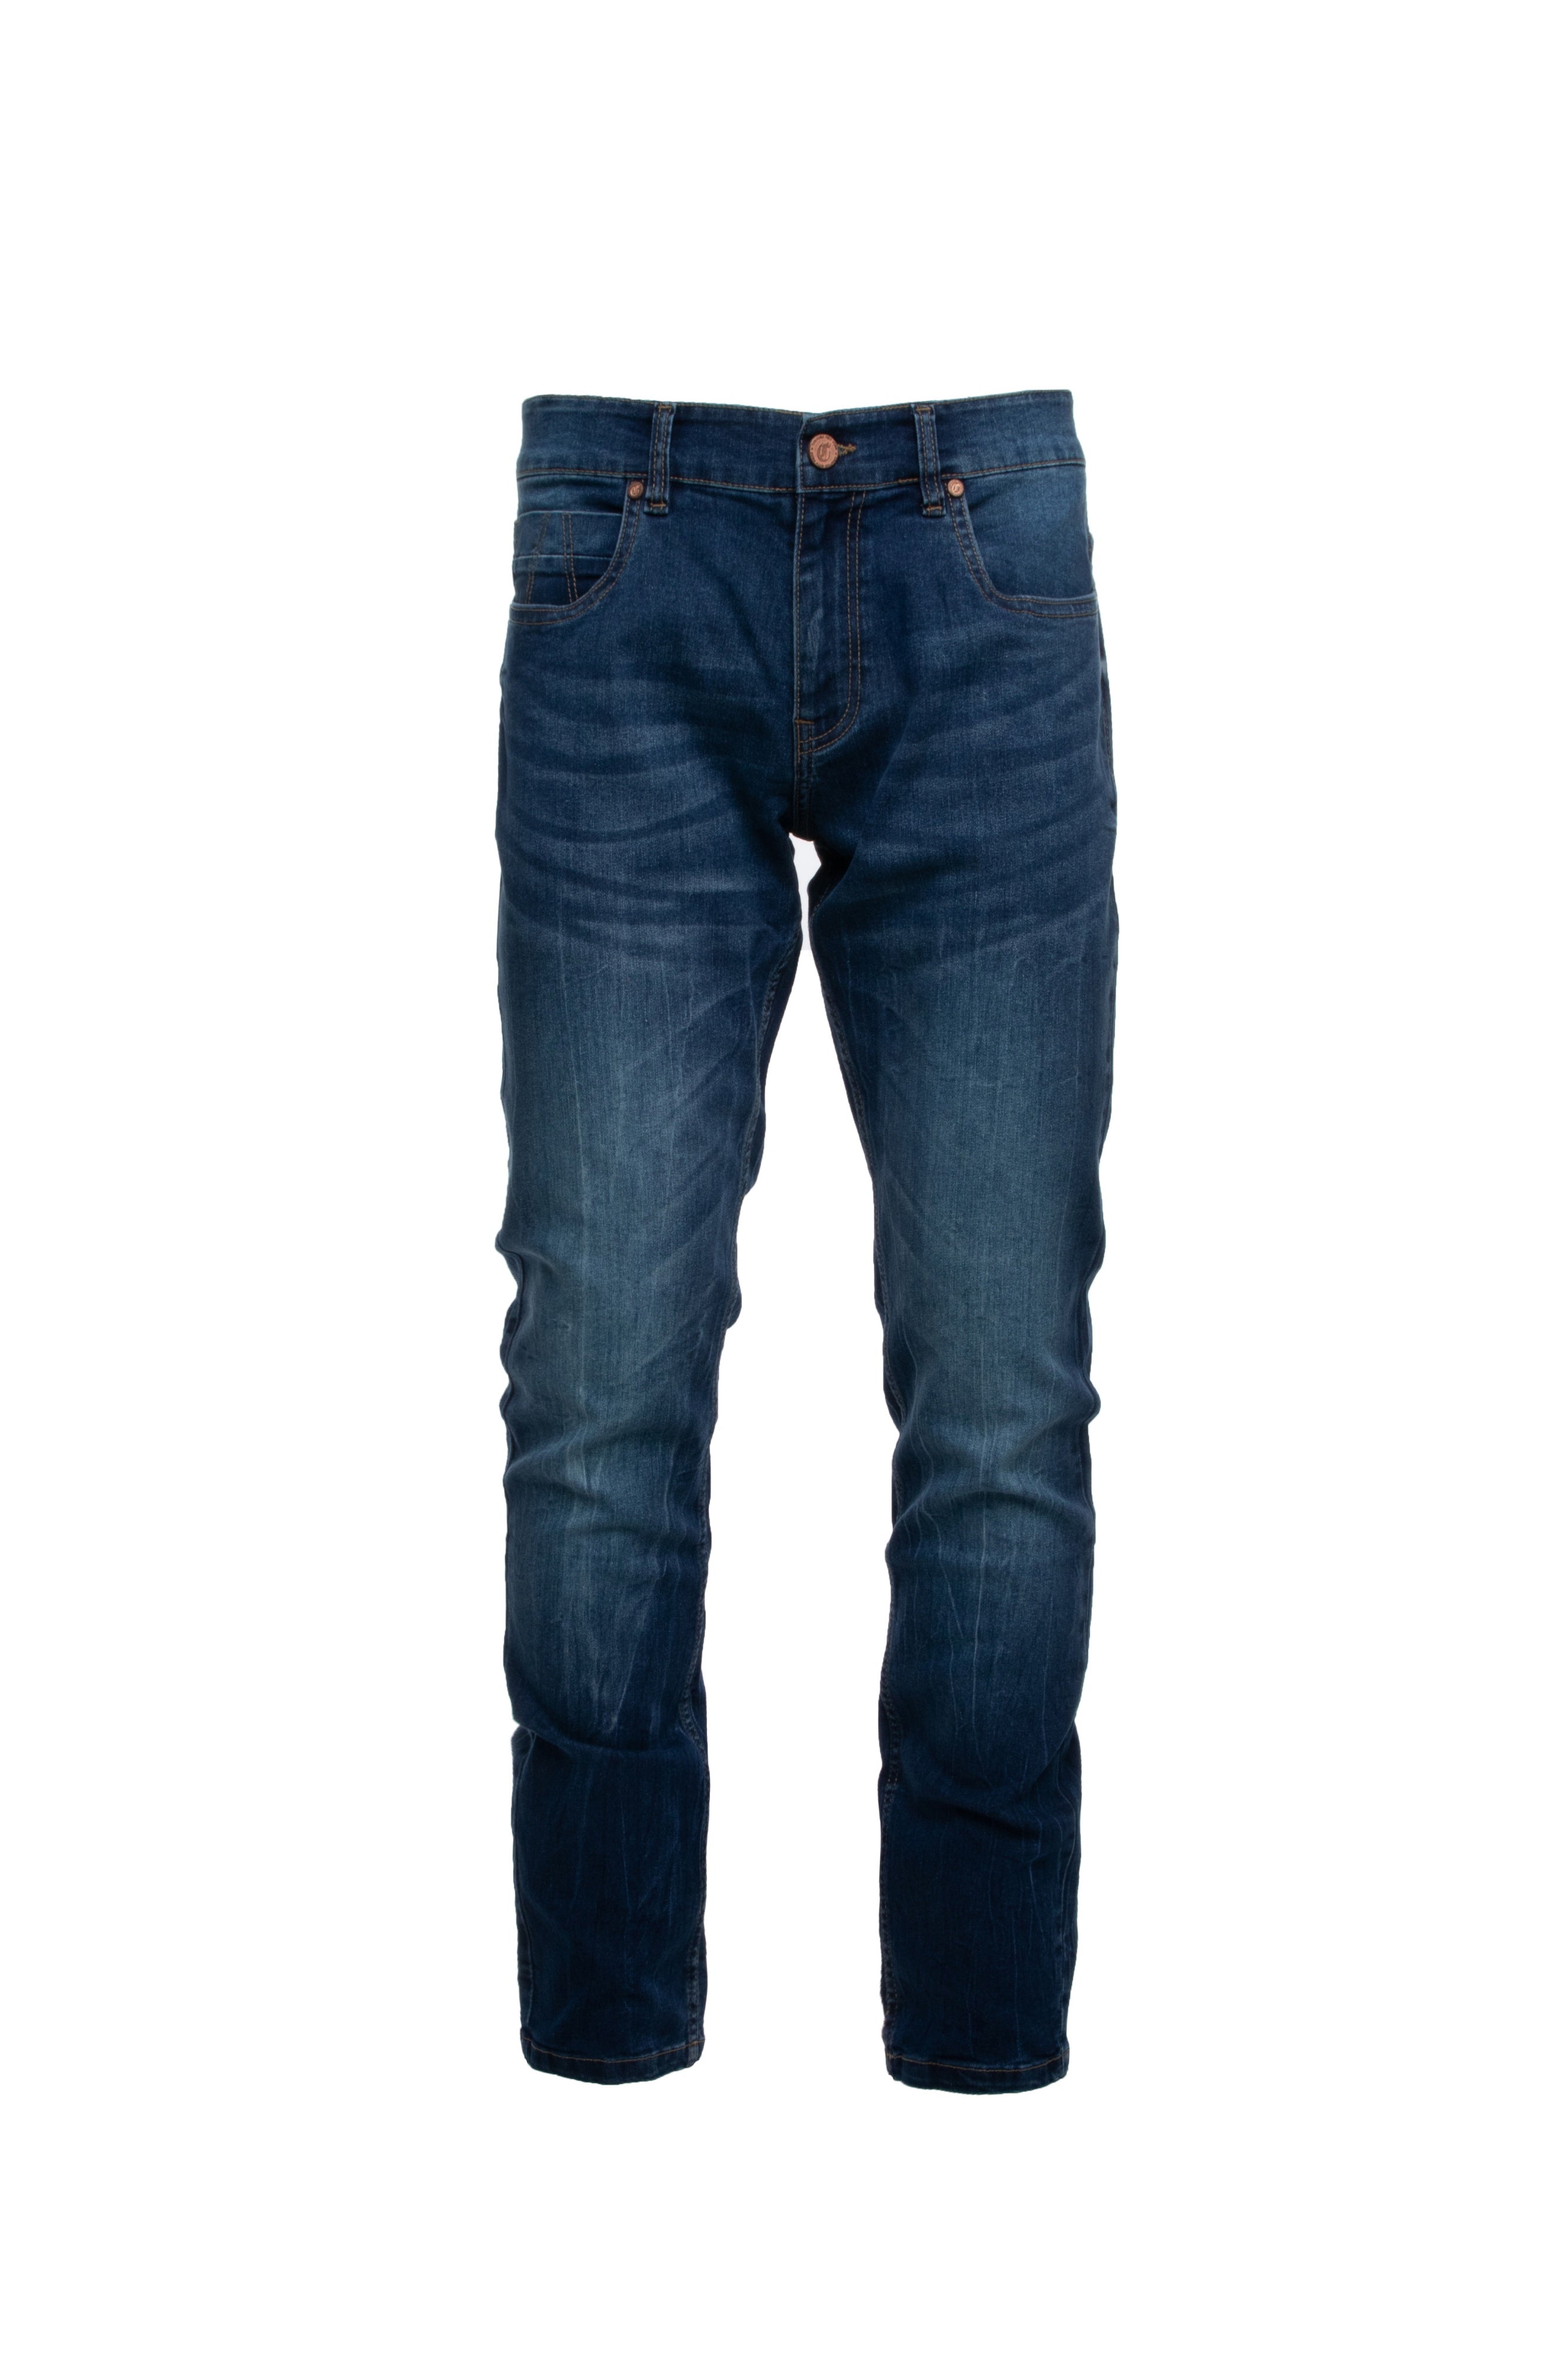 CULTURA AZURE Slim Fit Stretch Jeans for Men – X-RAY JEANS